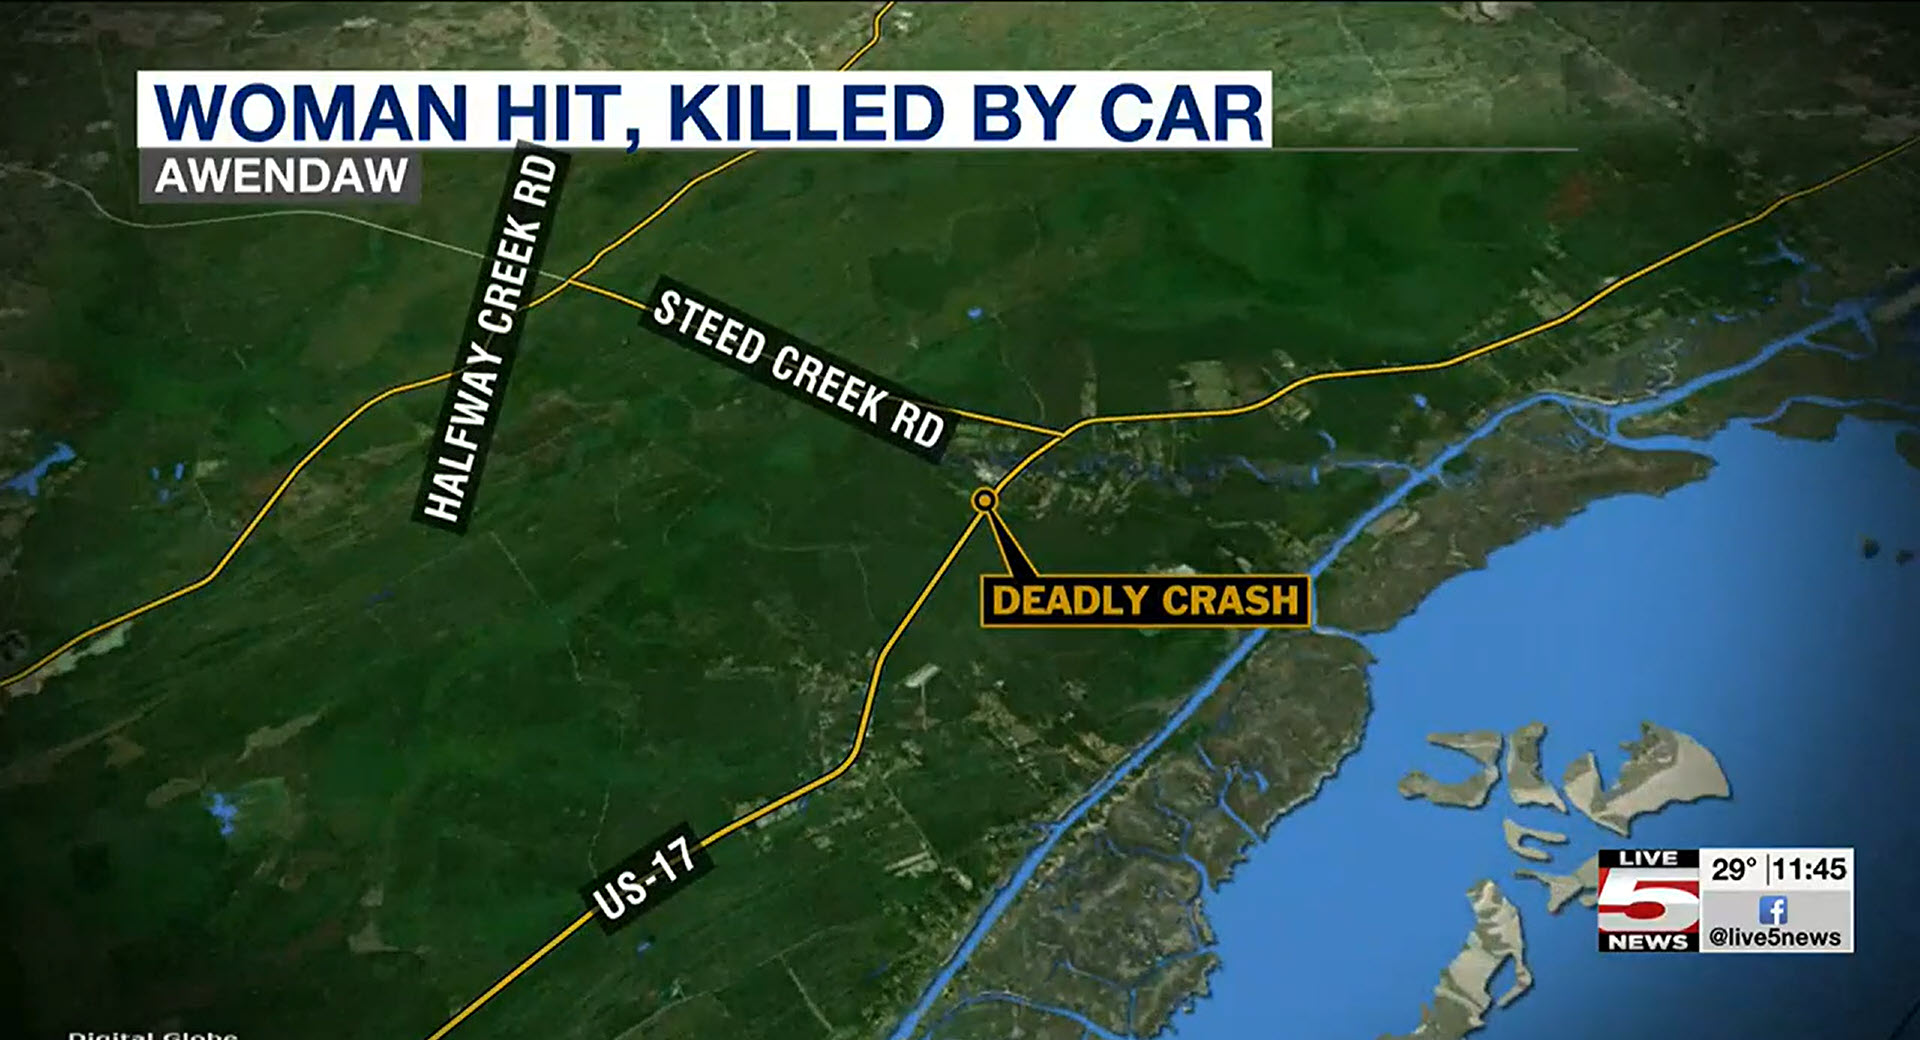 Auto-Pedestrian Wreck in Awendaw Leaves Charleston Woman Dead